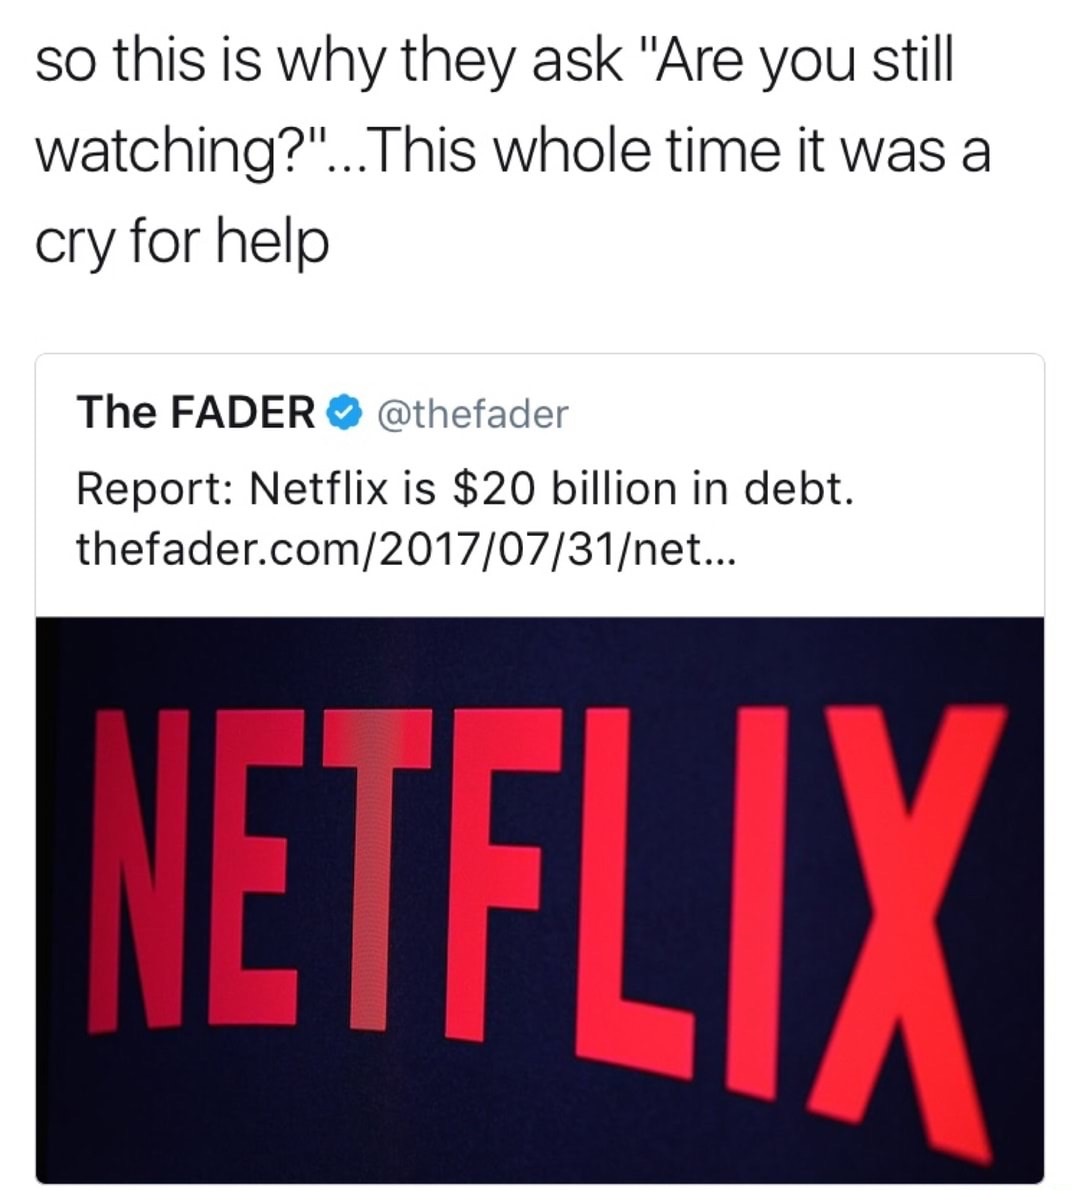 angle - so this is why they ask "Are you still watching?"... This whole time it was a cry for help The Fader Report Netflix is $20 billion in debt. thefader.comnet...